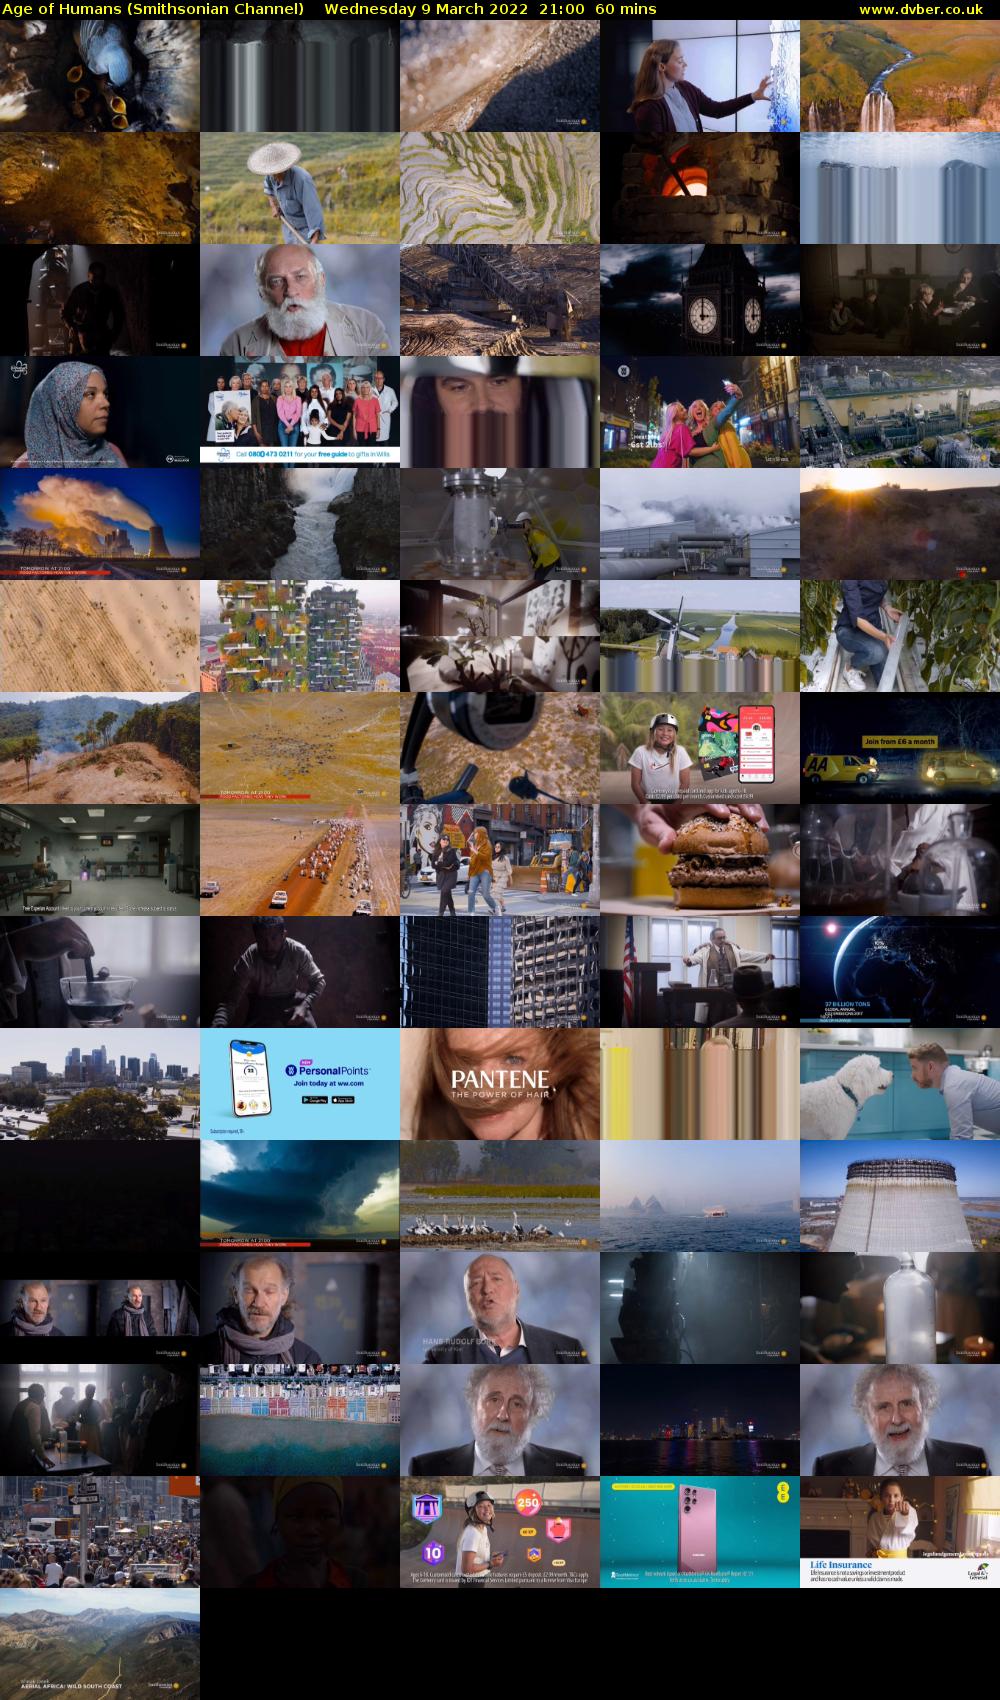 Age of Humans (Smithsonian Channel) Wednesday 9 March 2022 21:00 - 22:00